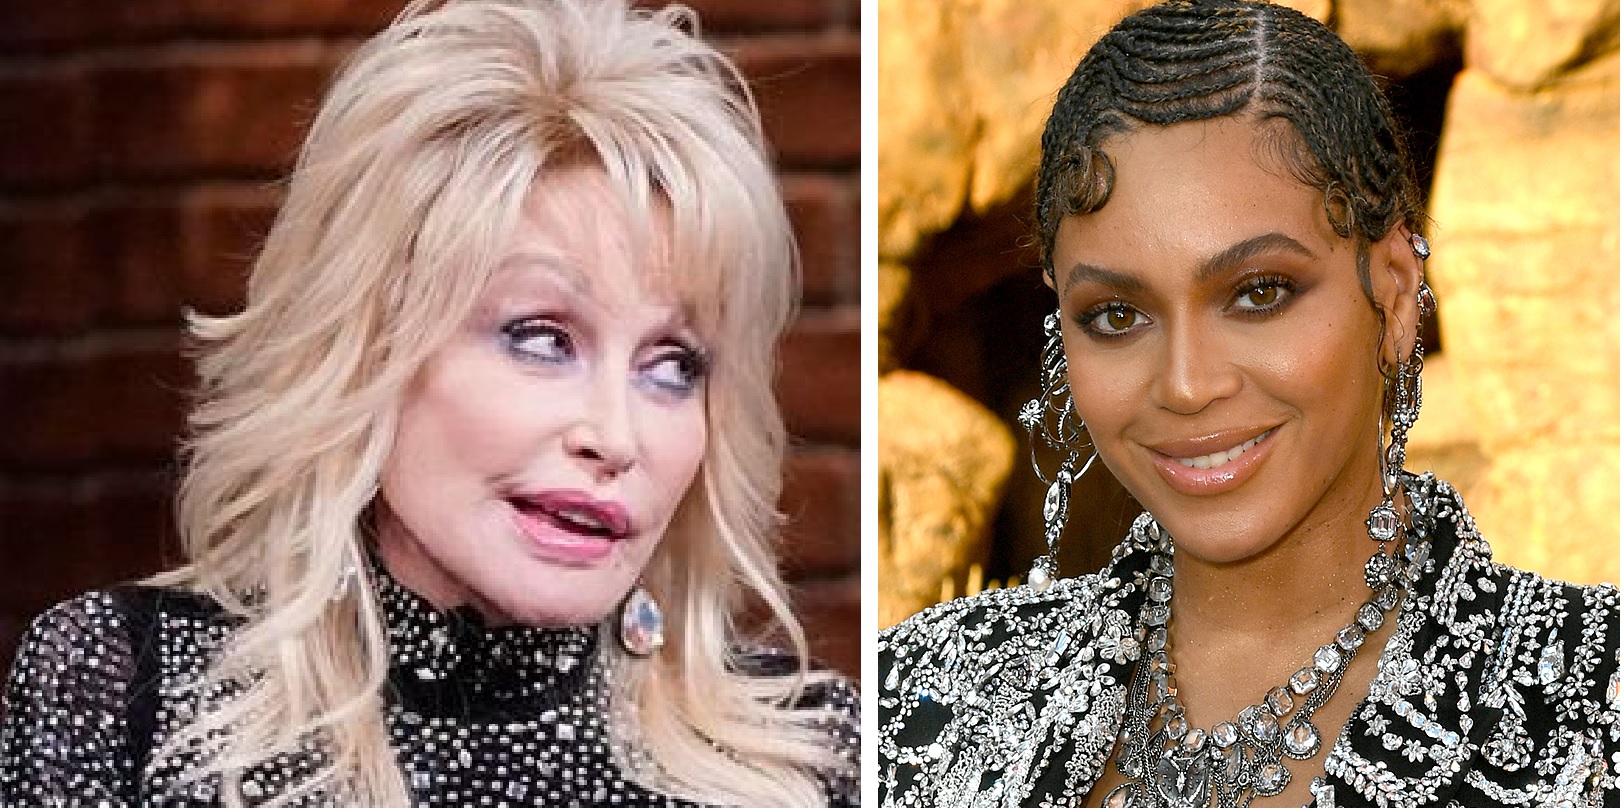 Dolly Parton Says She Wants ‘Someone Like Beyonce’ To Cover ‘Jolene’